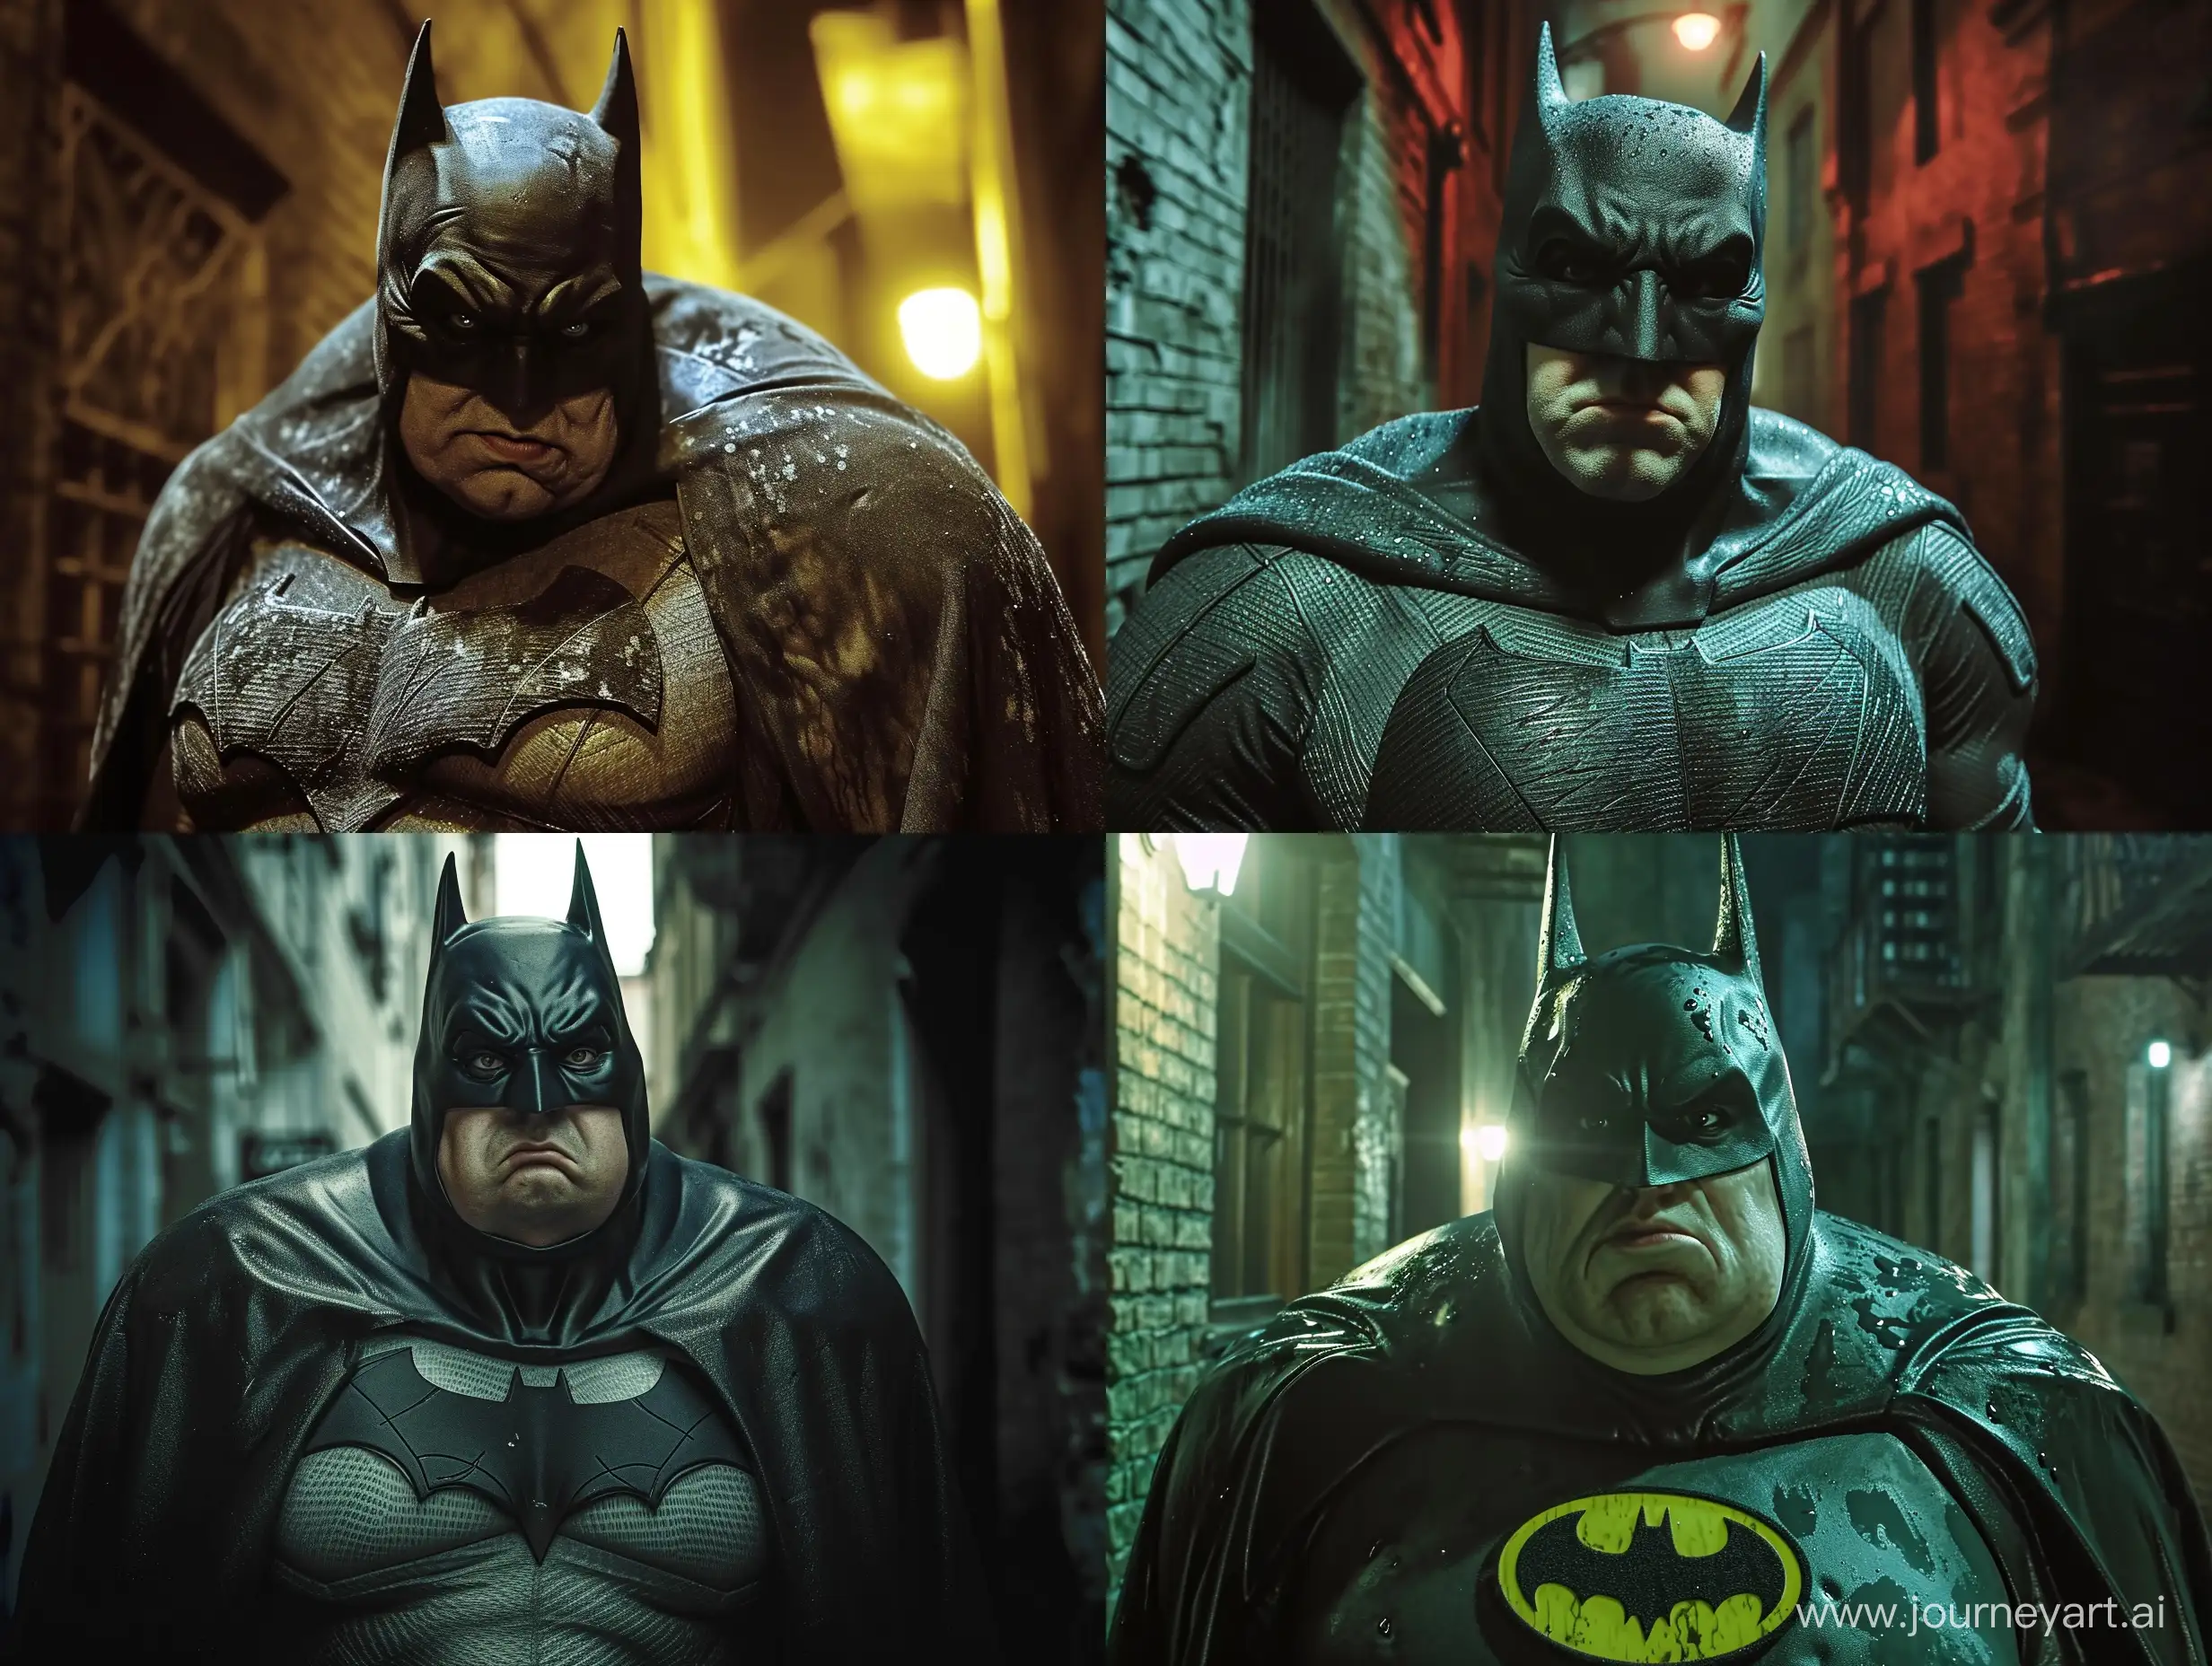 Brooding-Batman-Gazing-into-the-Abyss-in-a-Cinematic-Dark-Alley